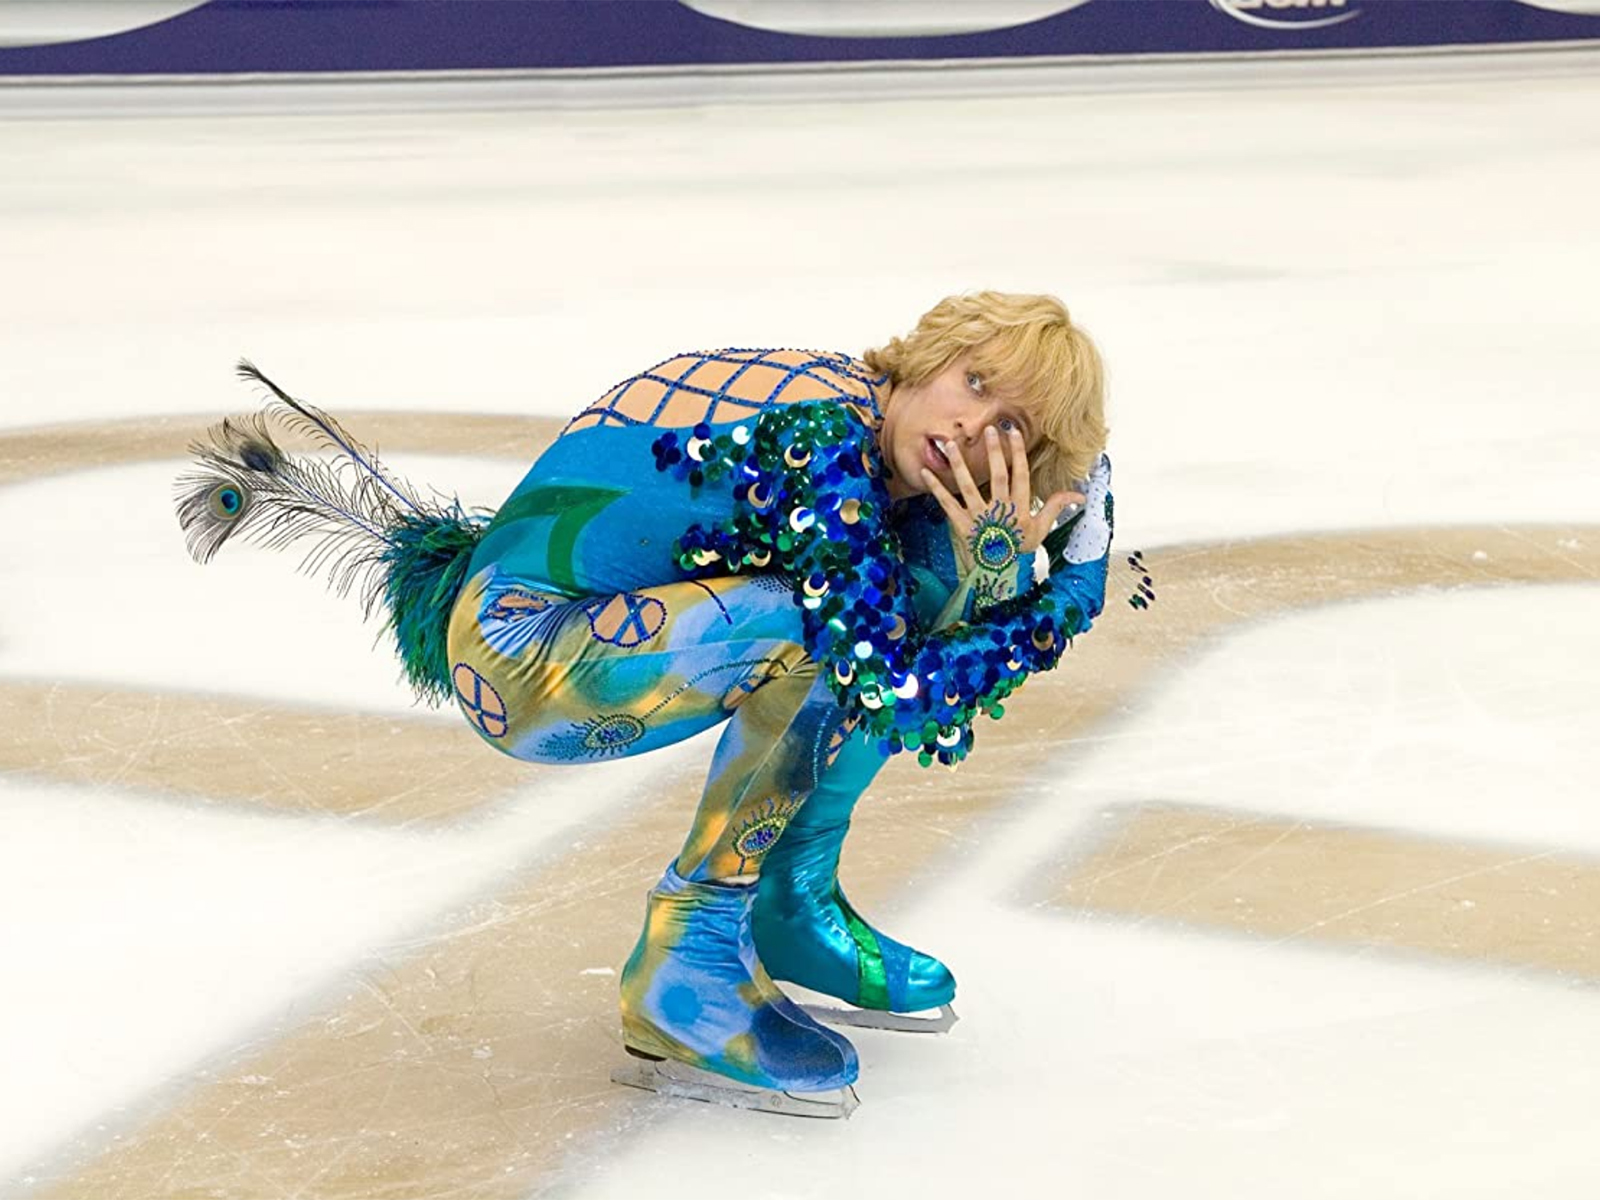 Jon Heder in “Blades of Glory” (2007)